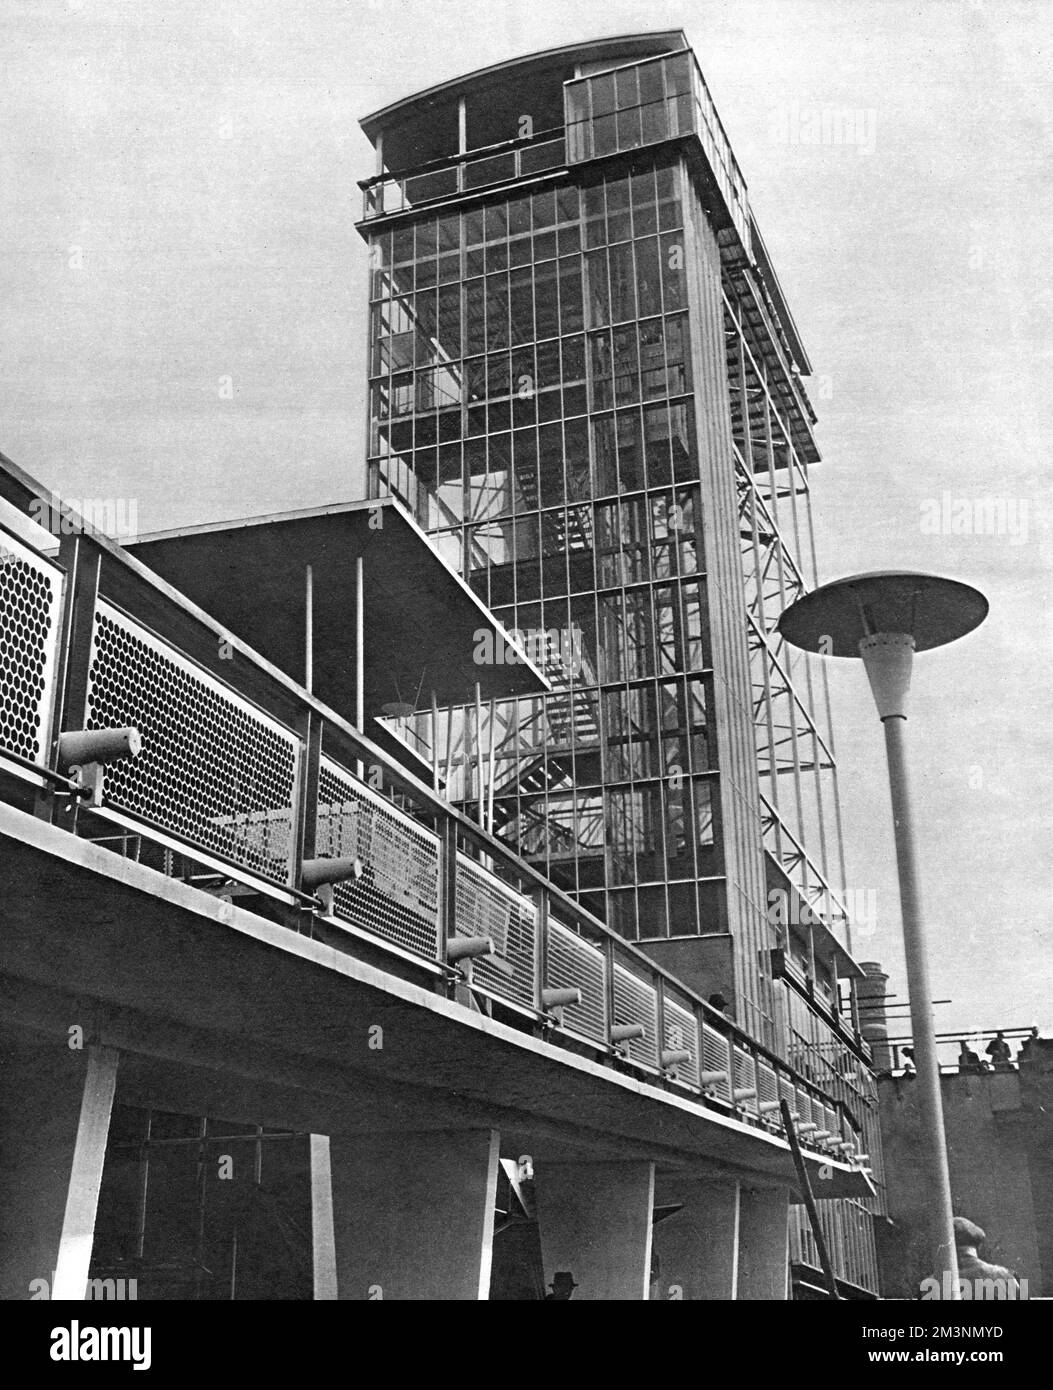 View of the Glass Tower by Waterloo Bridge, at the Festival of Britain exhibition on the South Bank, London.  The tower was made of steel and glass, and contained a lift, a stairway and a series of platforms, allowing for panoramic views of London, as well as a bird's eye view of the exhibition itself.       Date: early 1951 Stock Photo